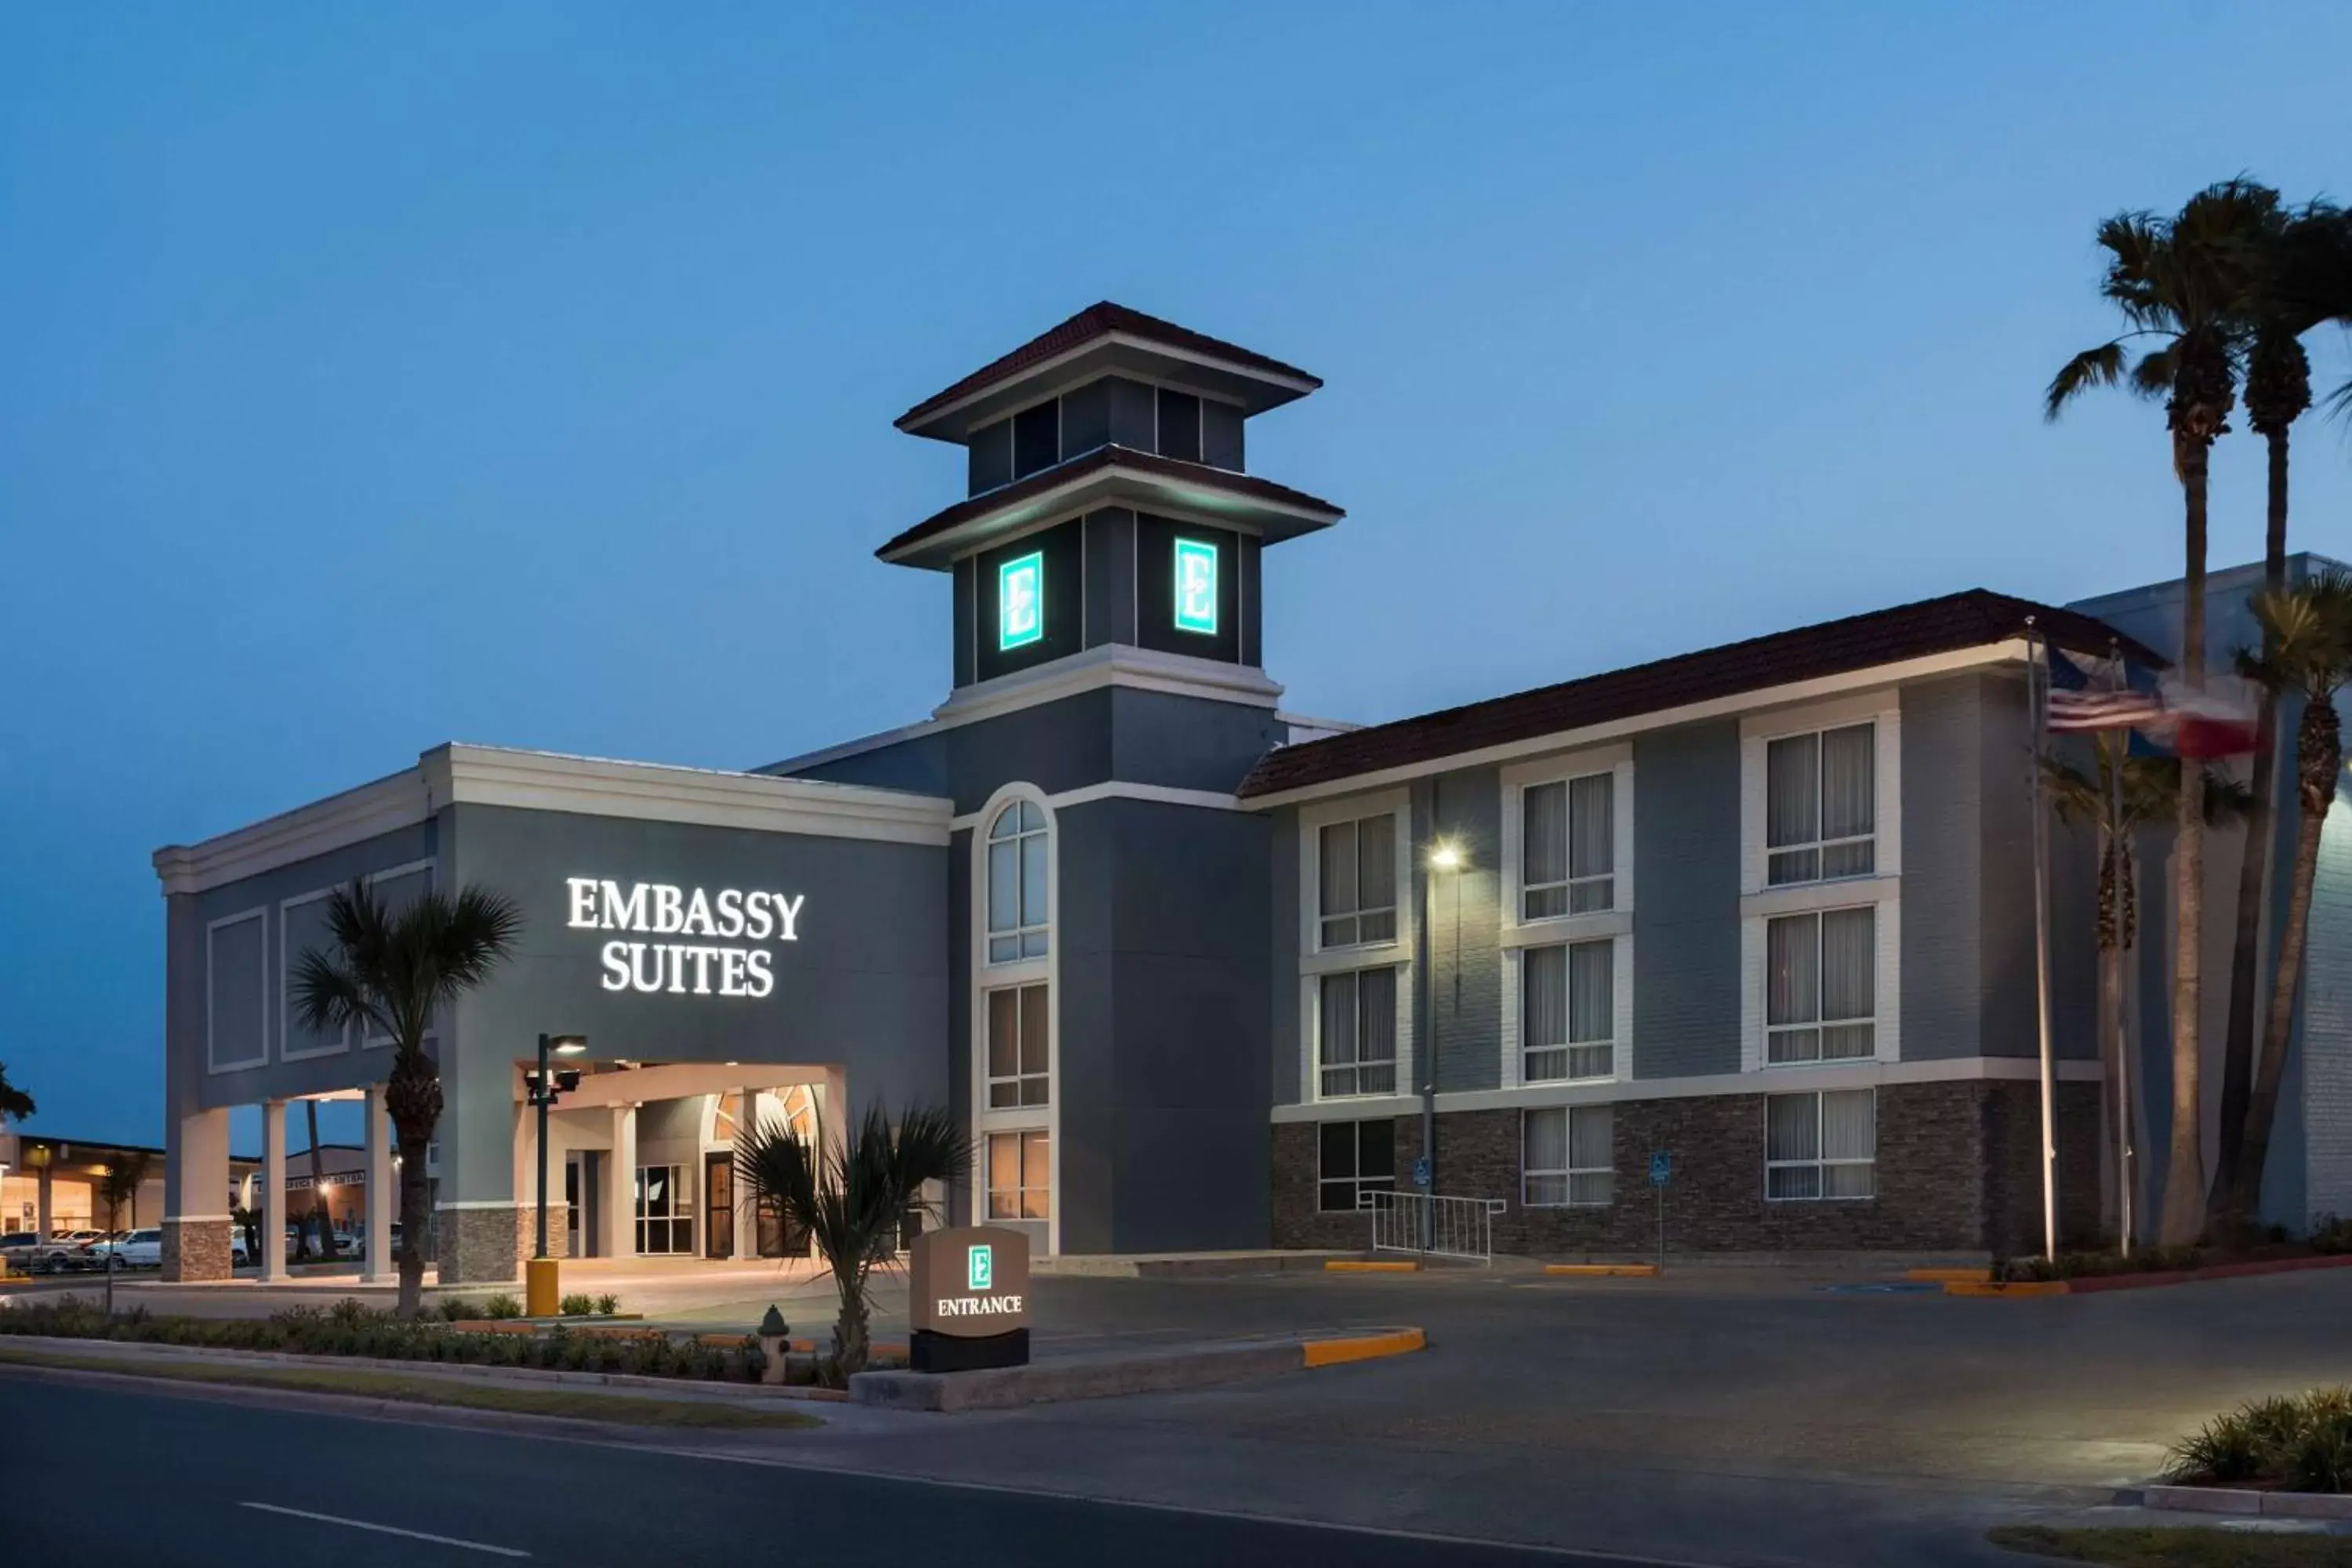 Property Building in Embassy Suites Corpus Christi